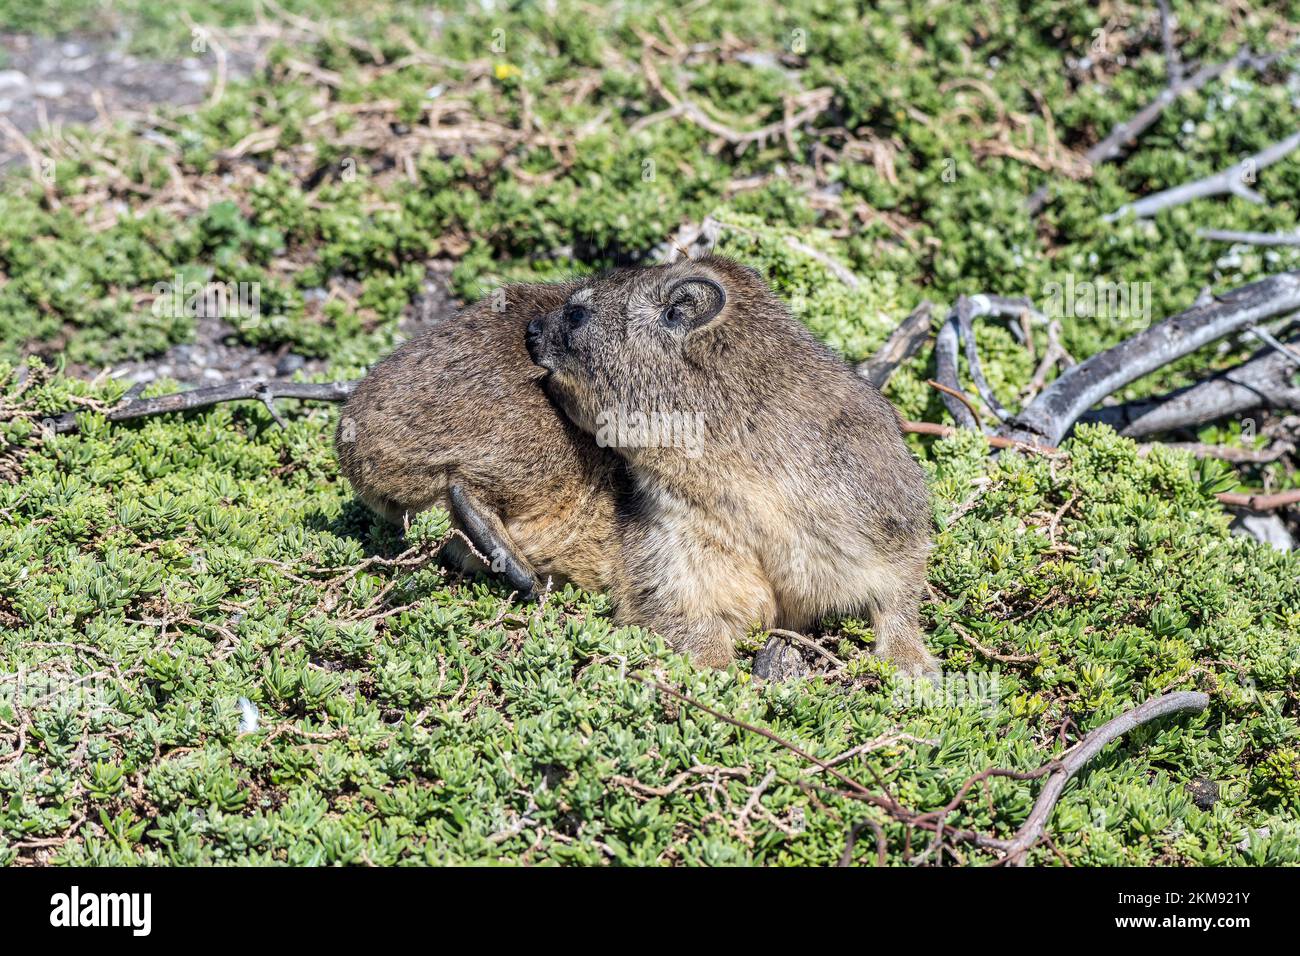 A Rock Hyrax, Procavia capensis, trying to bite an insect in its fur at Stony Point in Bettys Bay. Stock Photo